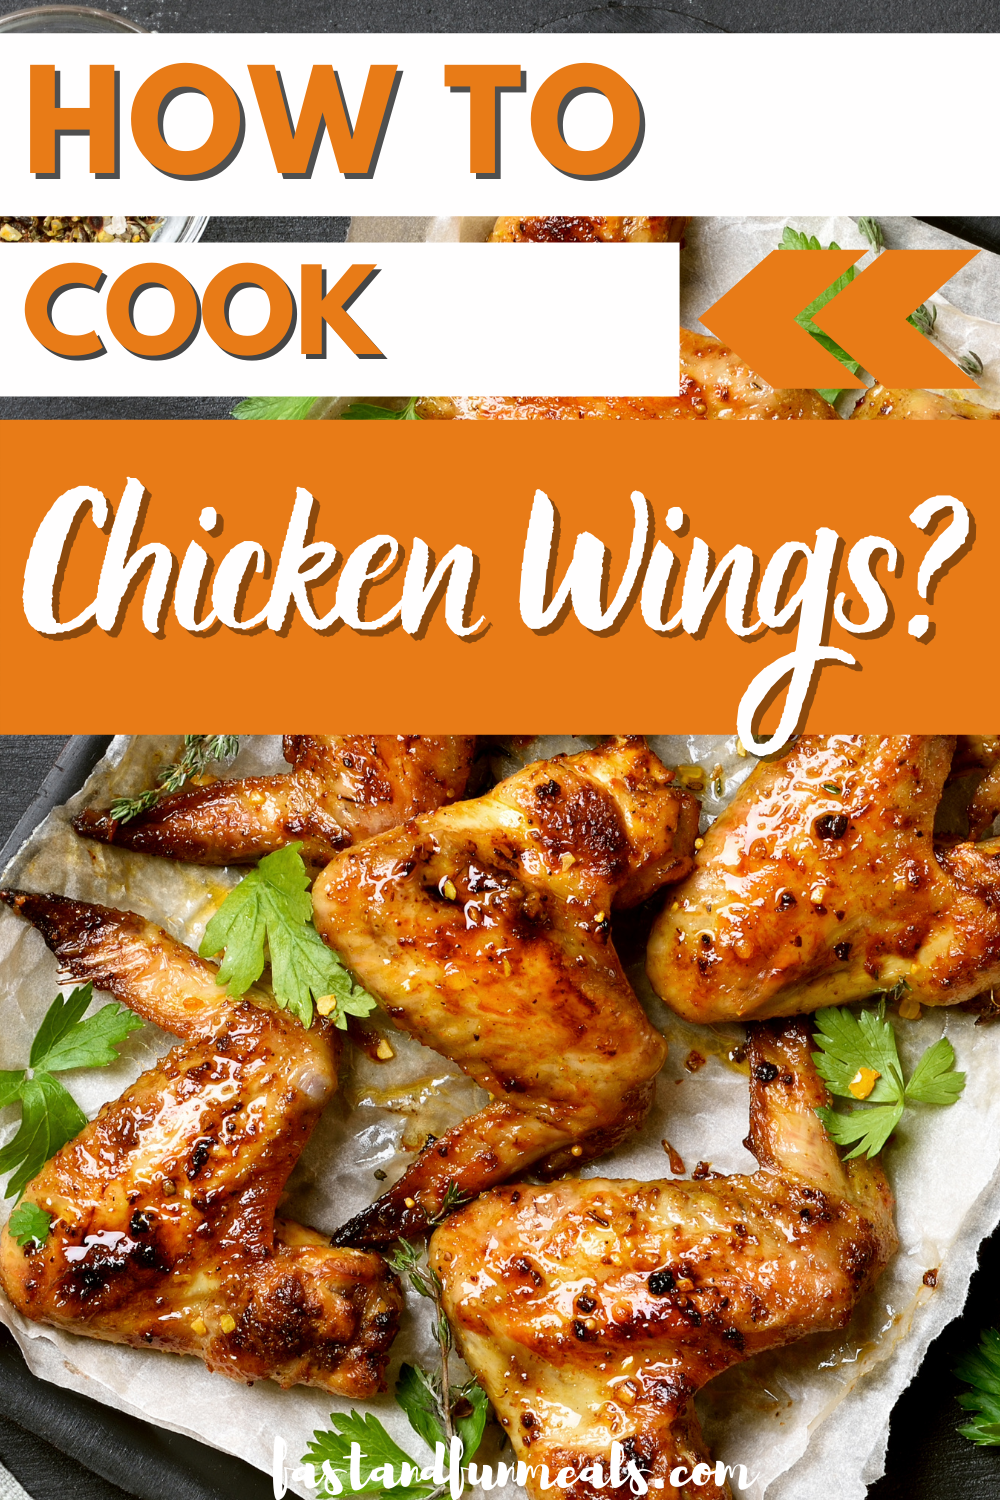 Pin showing the title How to Cook Chicken Wings